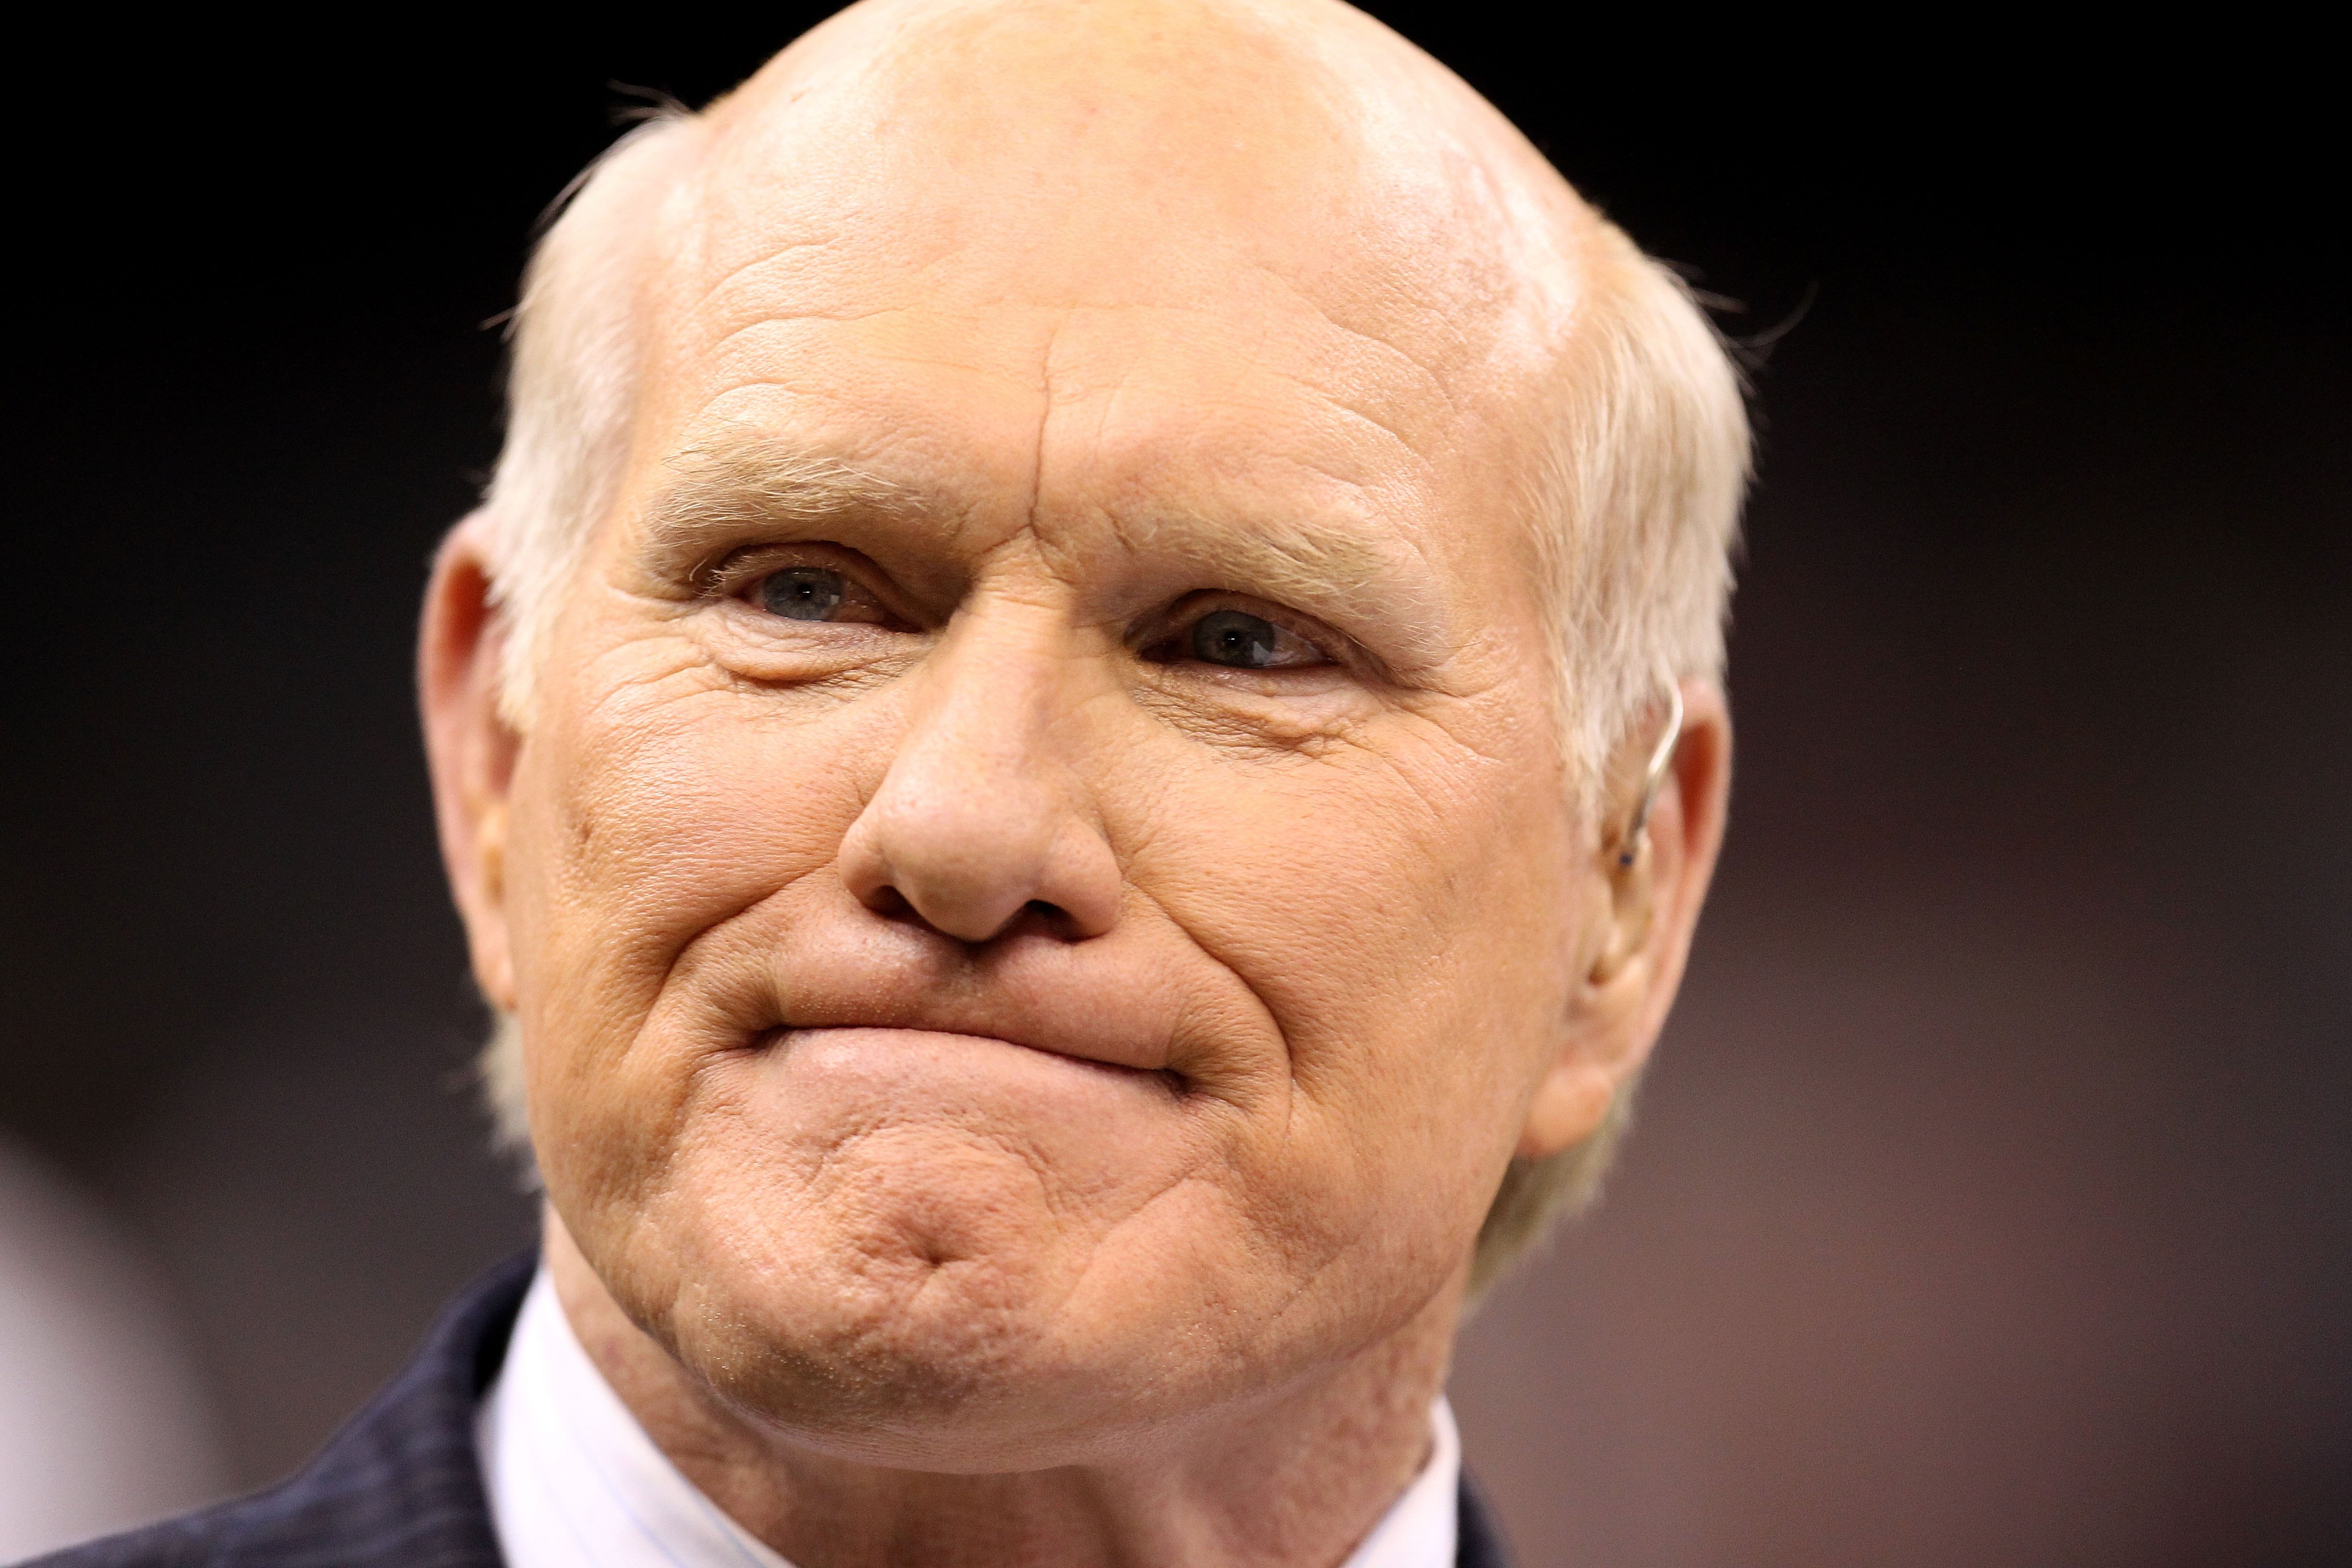 NEW ORLEANS - JANUARY 24:  Hall of Fame quarterback and current Fox Sports football analyst Terry Bradshaw looks on as the New Orleans Saints play against the Minnesota Vikings during the NFC Championship Game at the Louisiana Superdome on January 24, 201